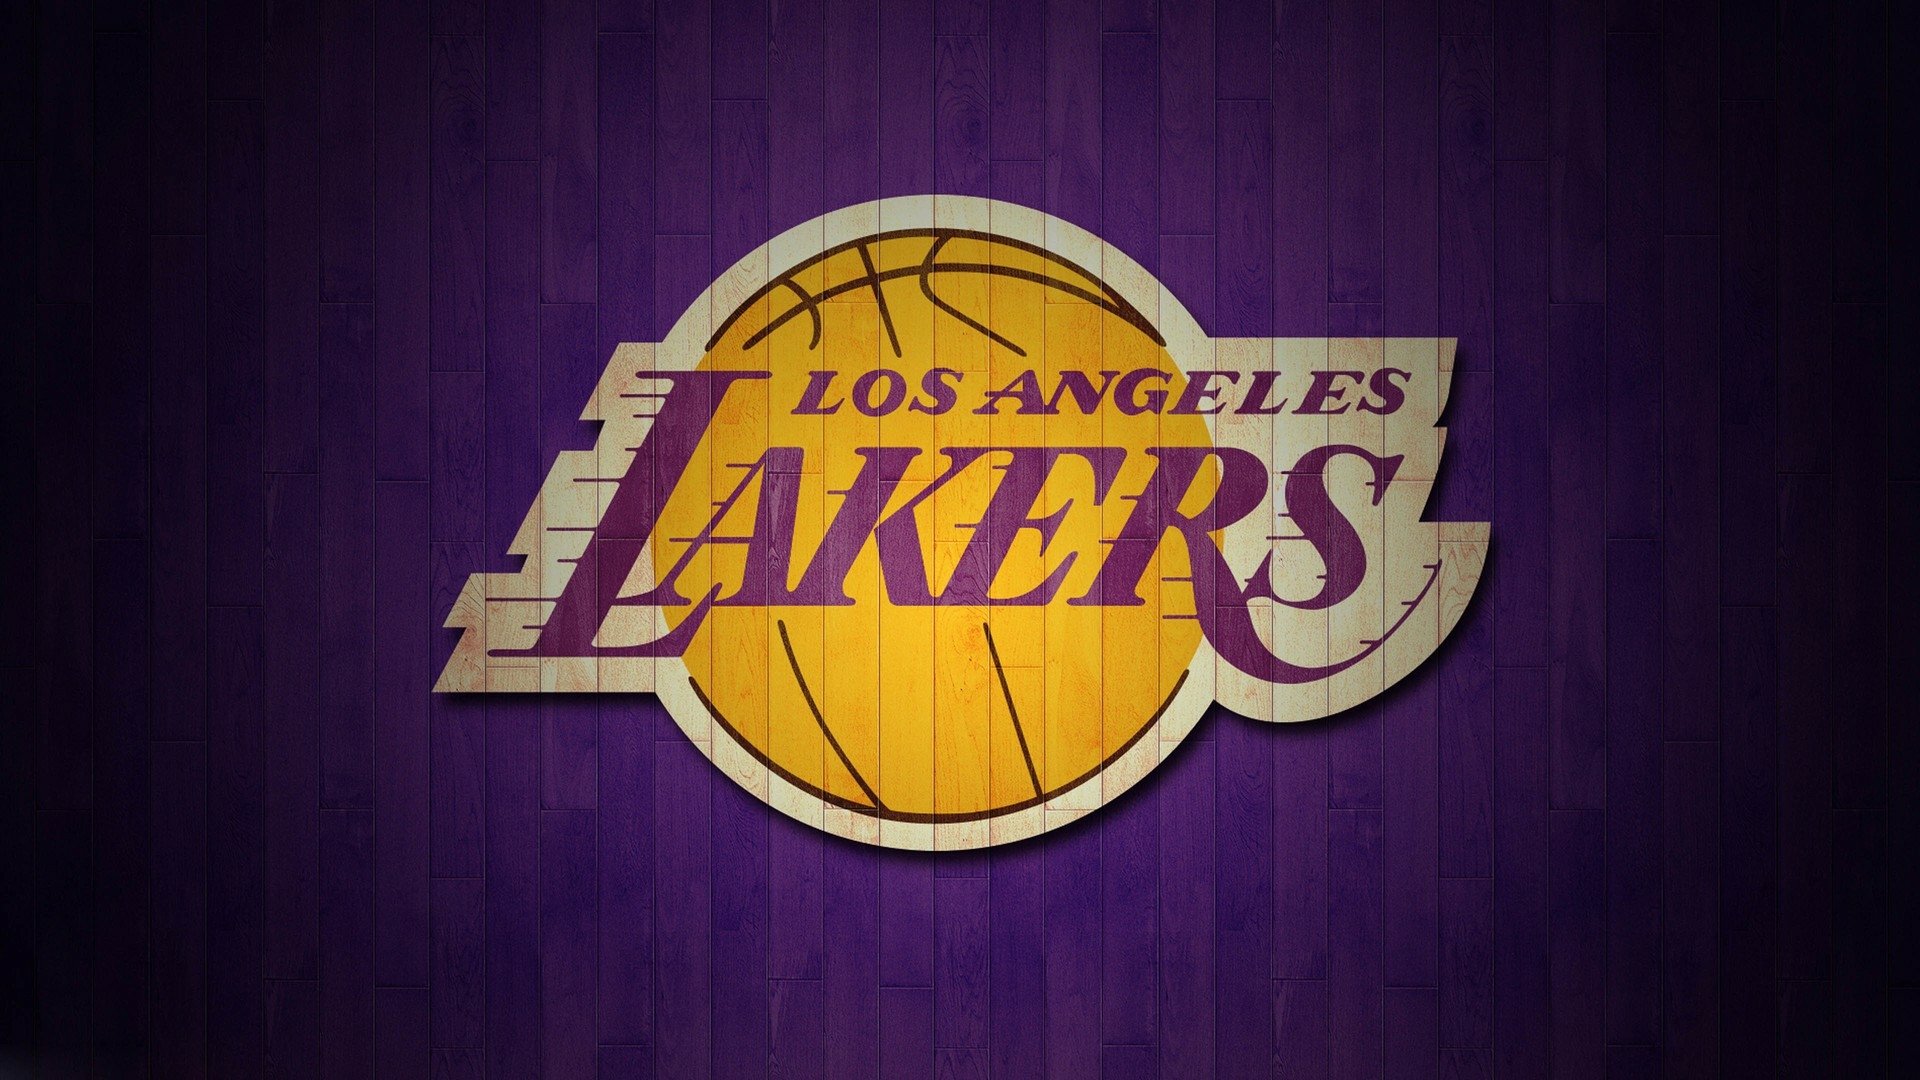 200+] Los Angeles Lakers Wallpapers